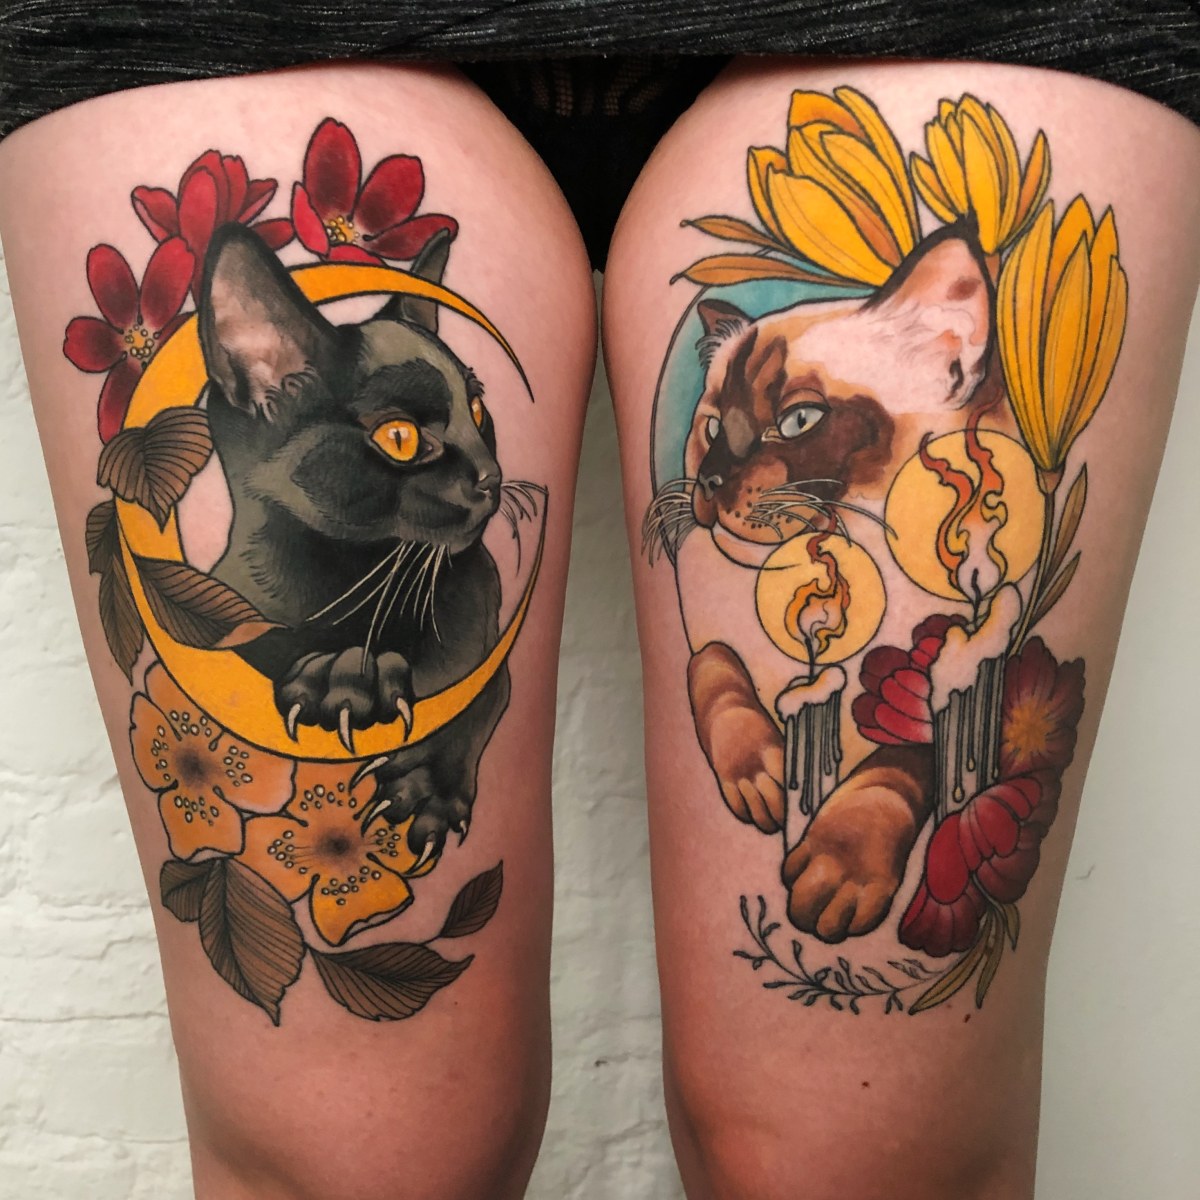 Stylized cat portrait done by Chelstine Clibourne at Funhouse Tattoo in San  Diego CA  rtattoos